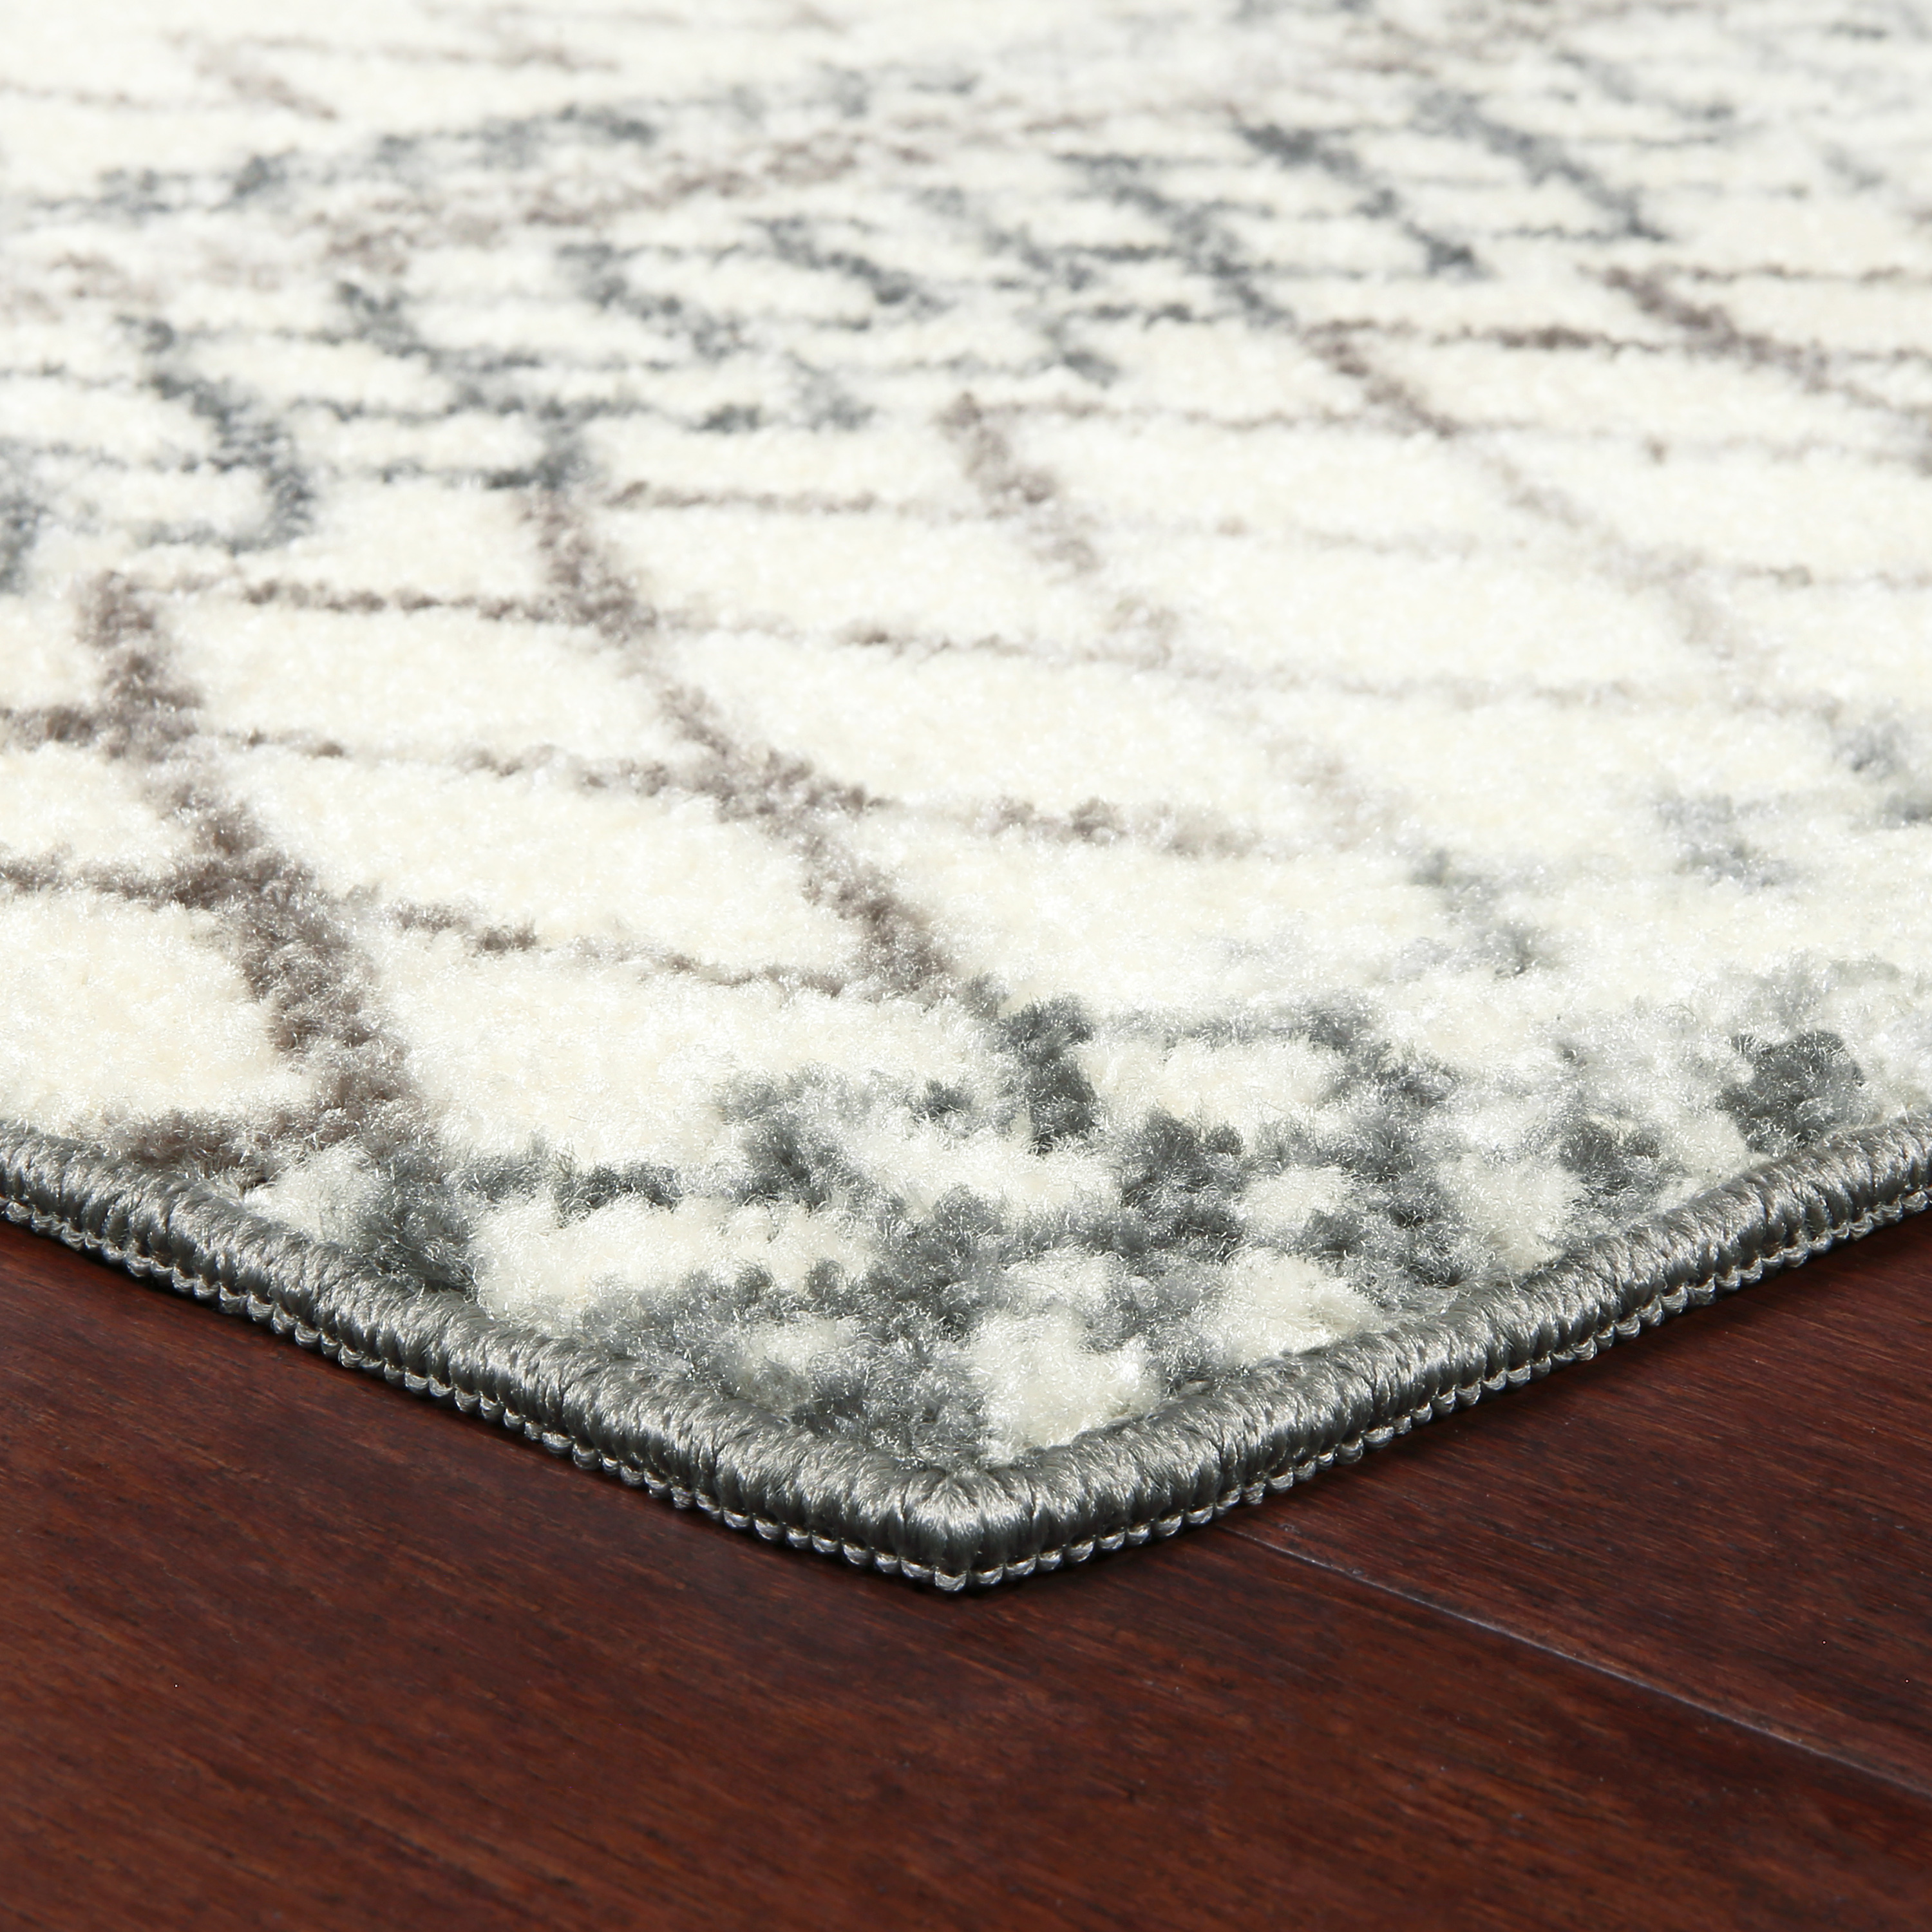 Maples Rugs Distressed Bohemian Diamond Indoor Area Rug, Ivory|Gray, 5' x 7' - image 5 of 7